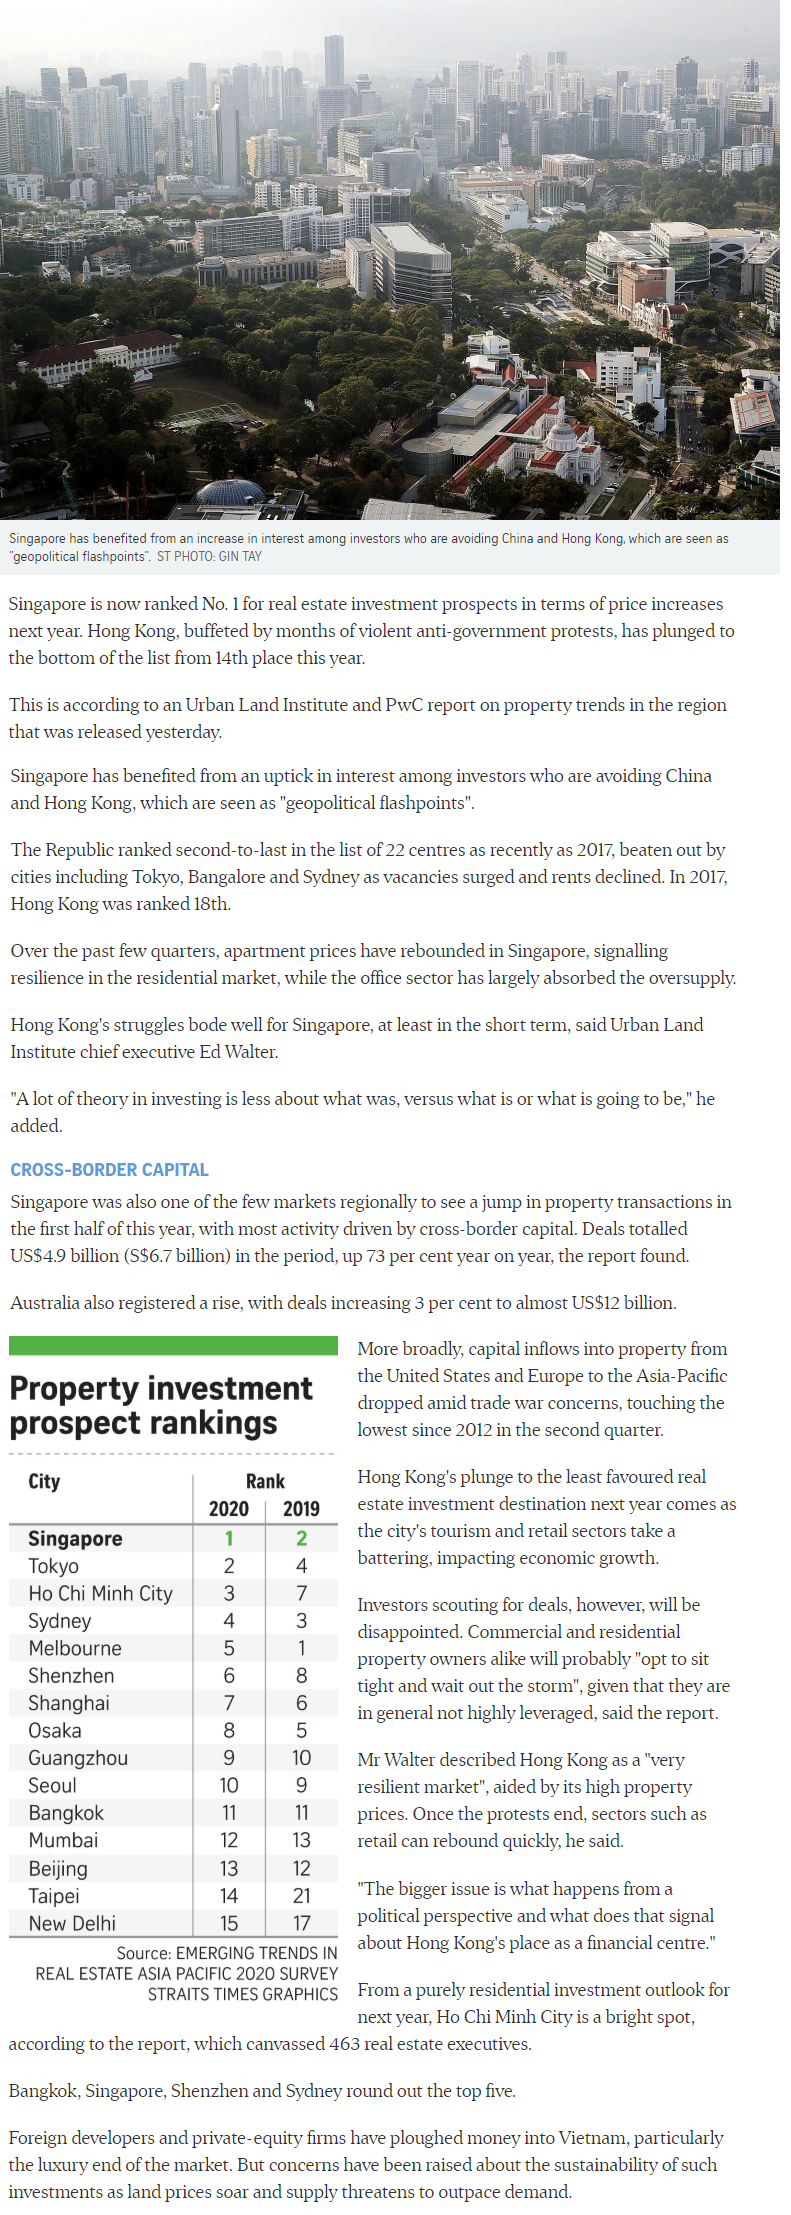 Midtown Bay - Singapore Tops Region For Property Investment Prospects